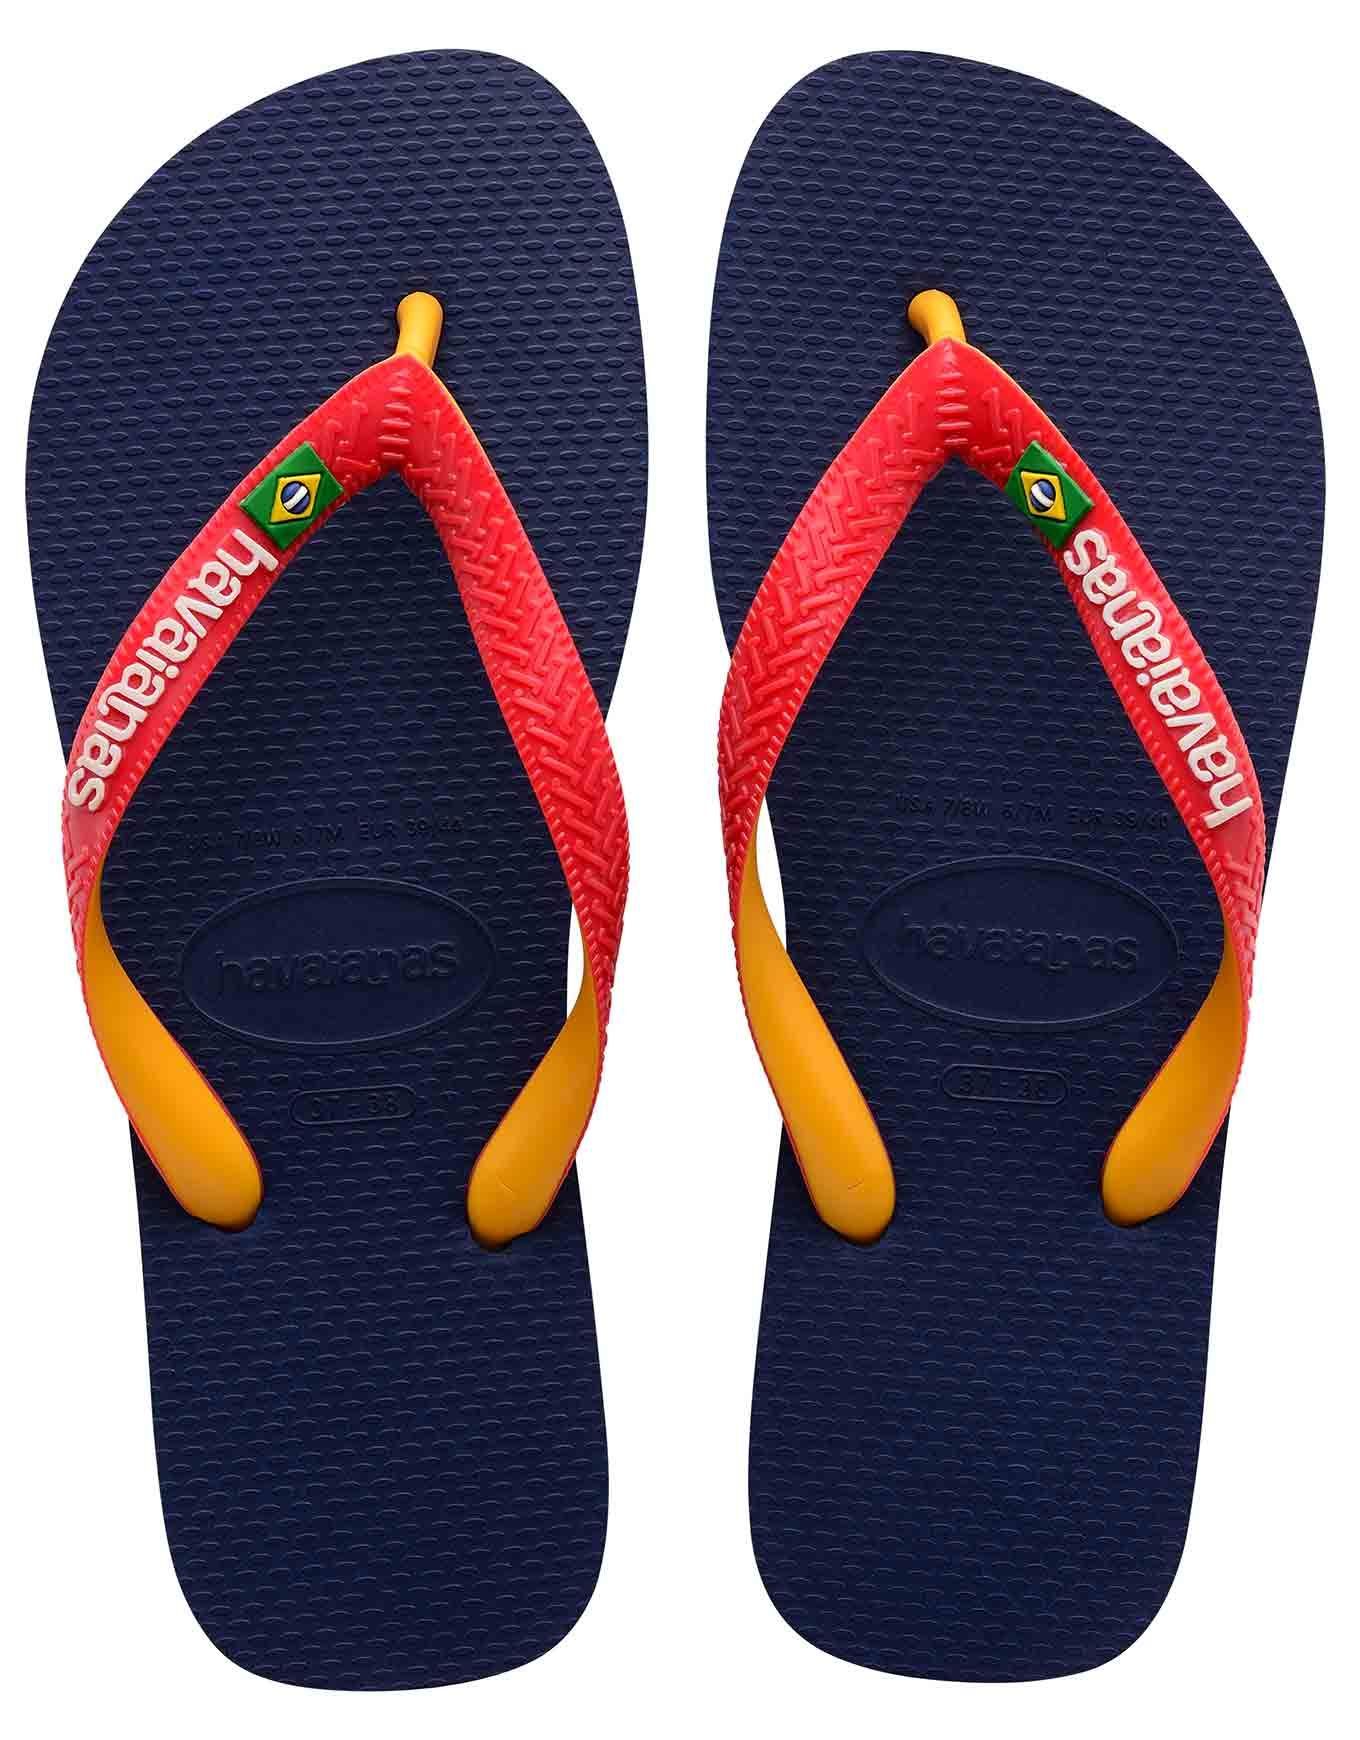 HAVAIANAS BRASIL MIX NVY/RED 39/40